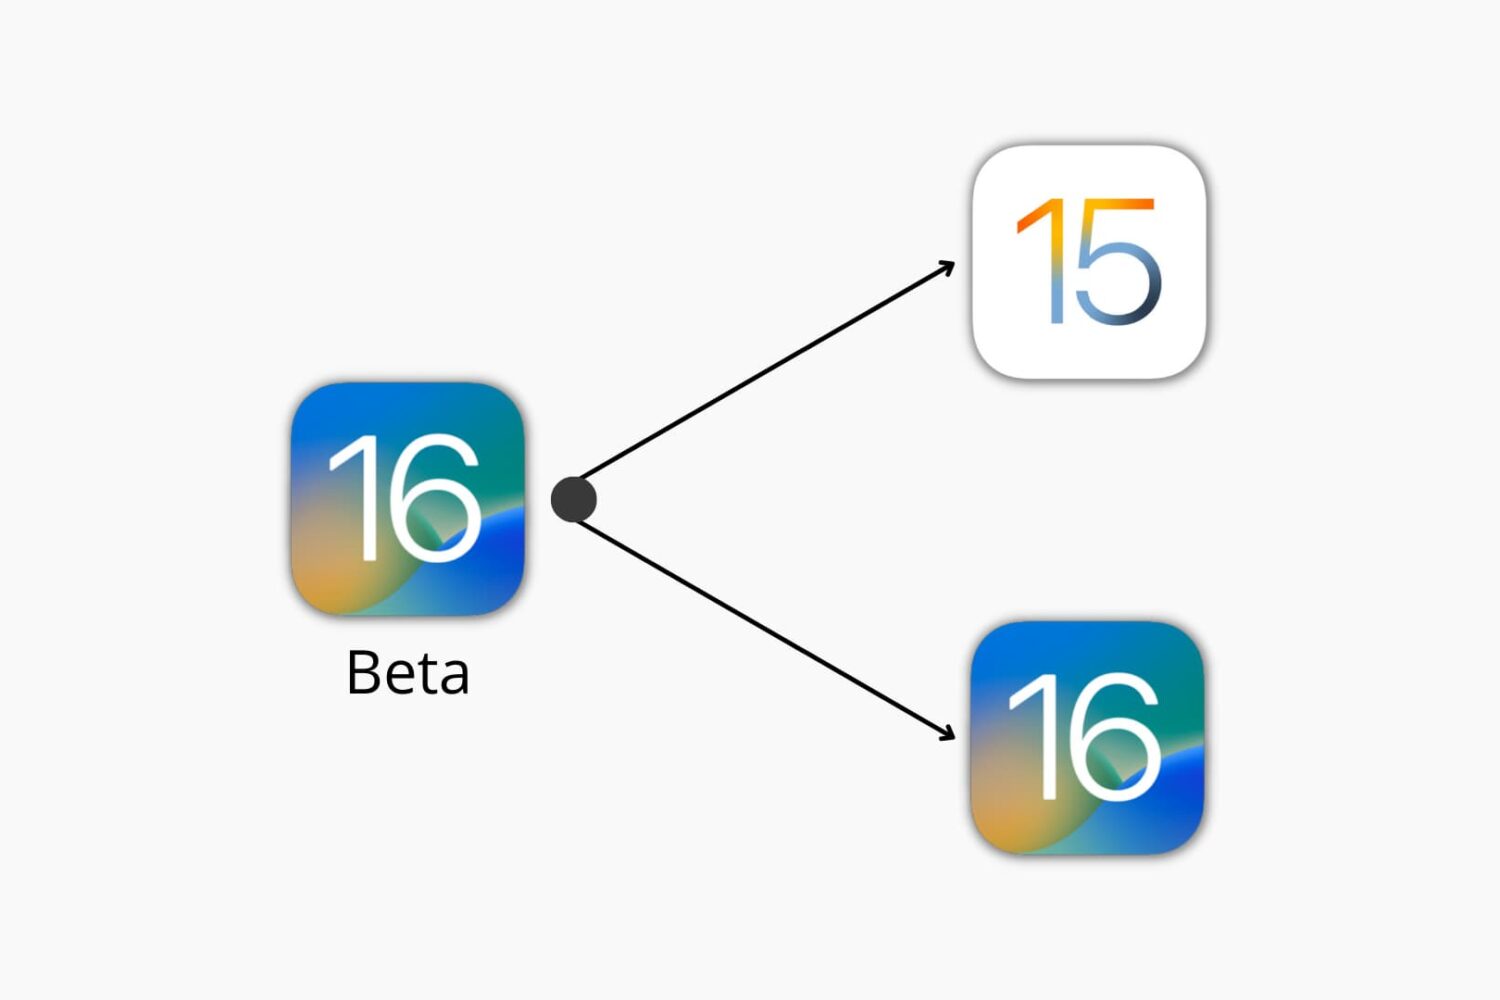 Switch from iOS 16 beta to iOS 15 or iOS 16 public version